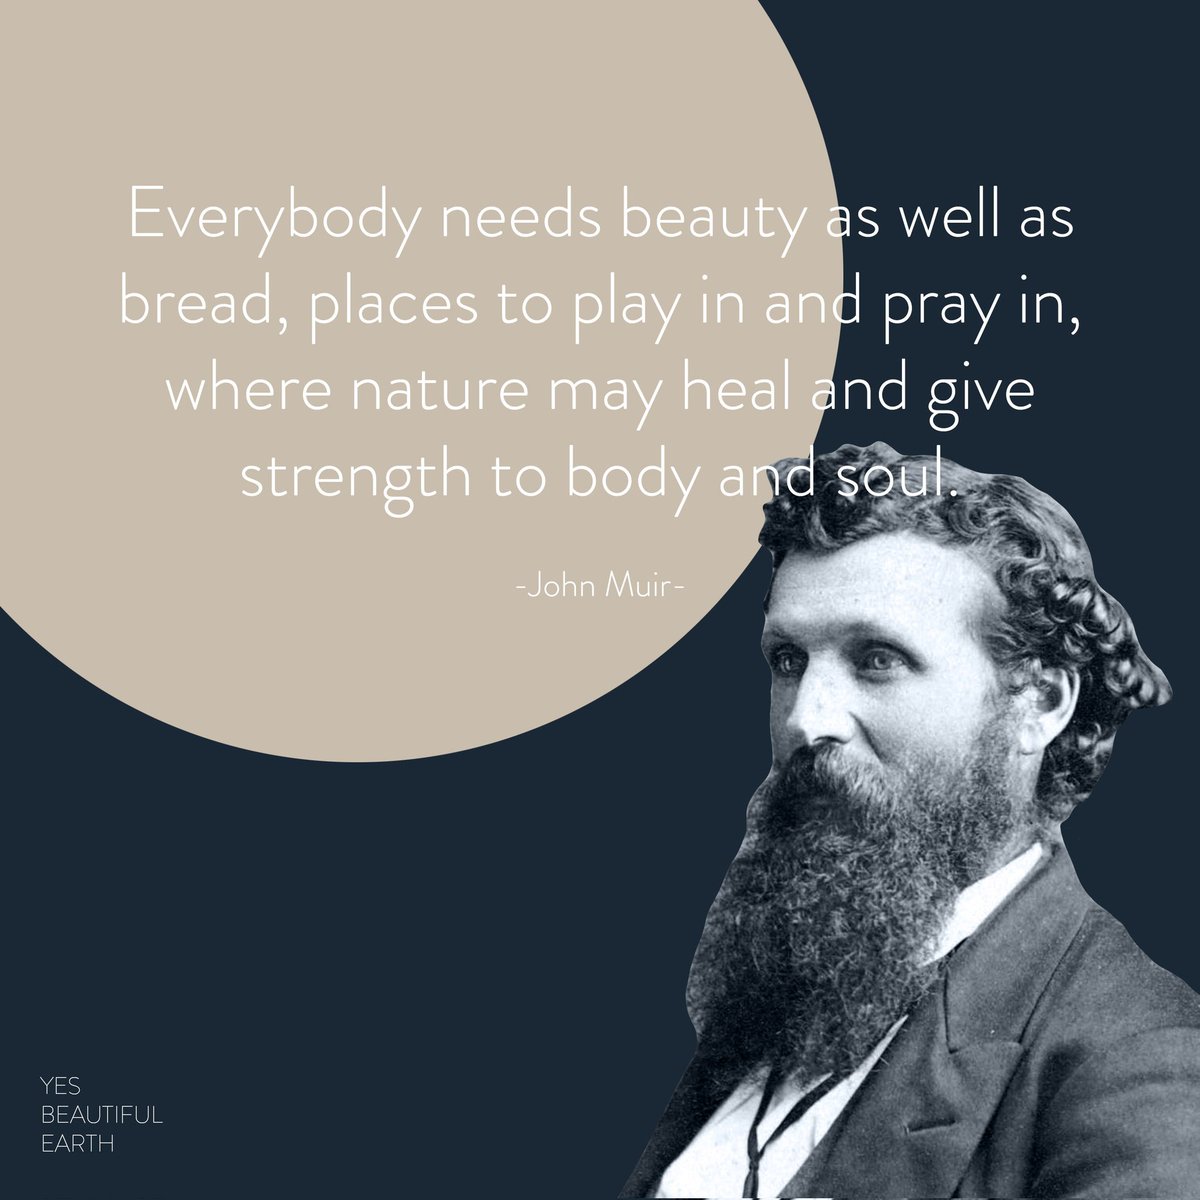 🖤🌱 #yesbeautifulearth #johnmuir #lovenature #loveplanetearth #respectmothernature #connectwithnature